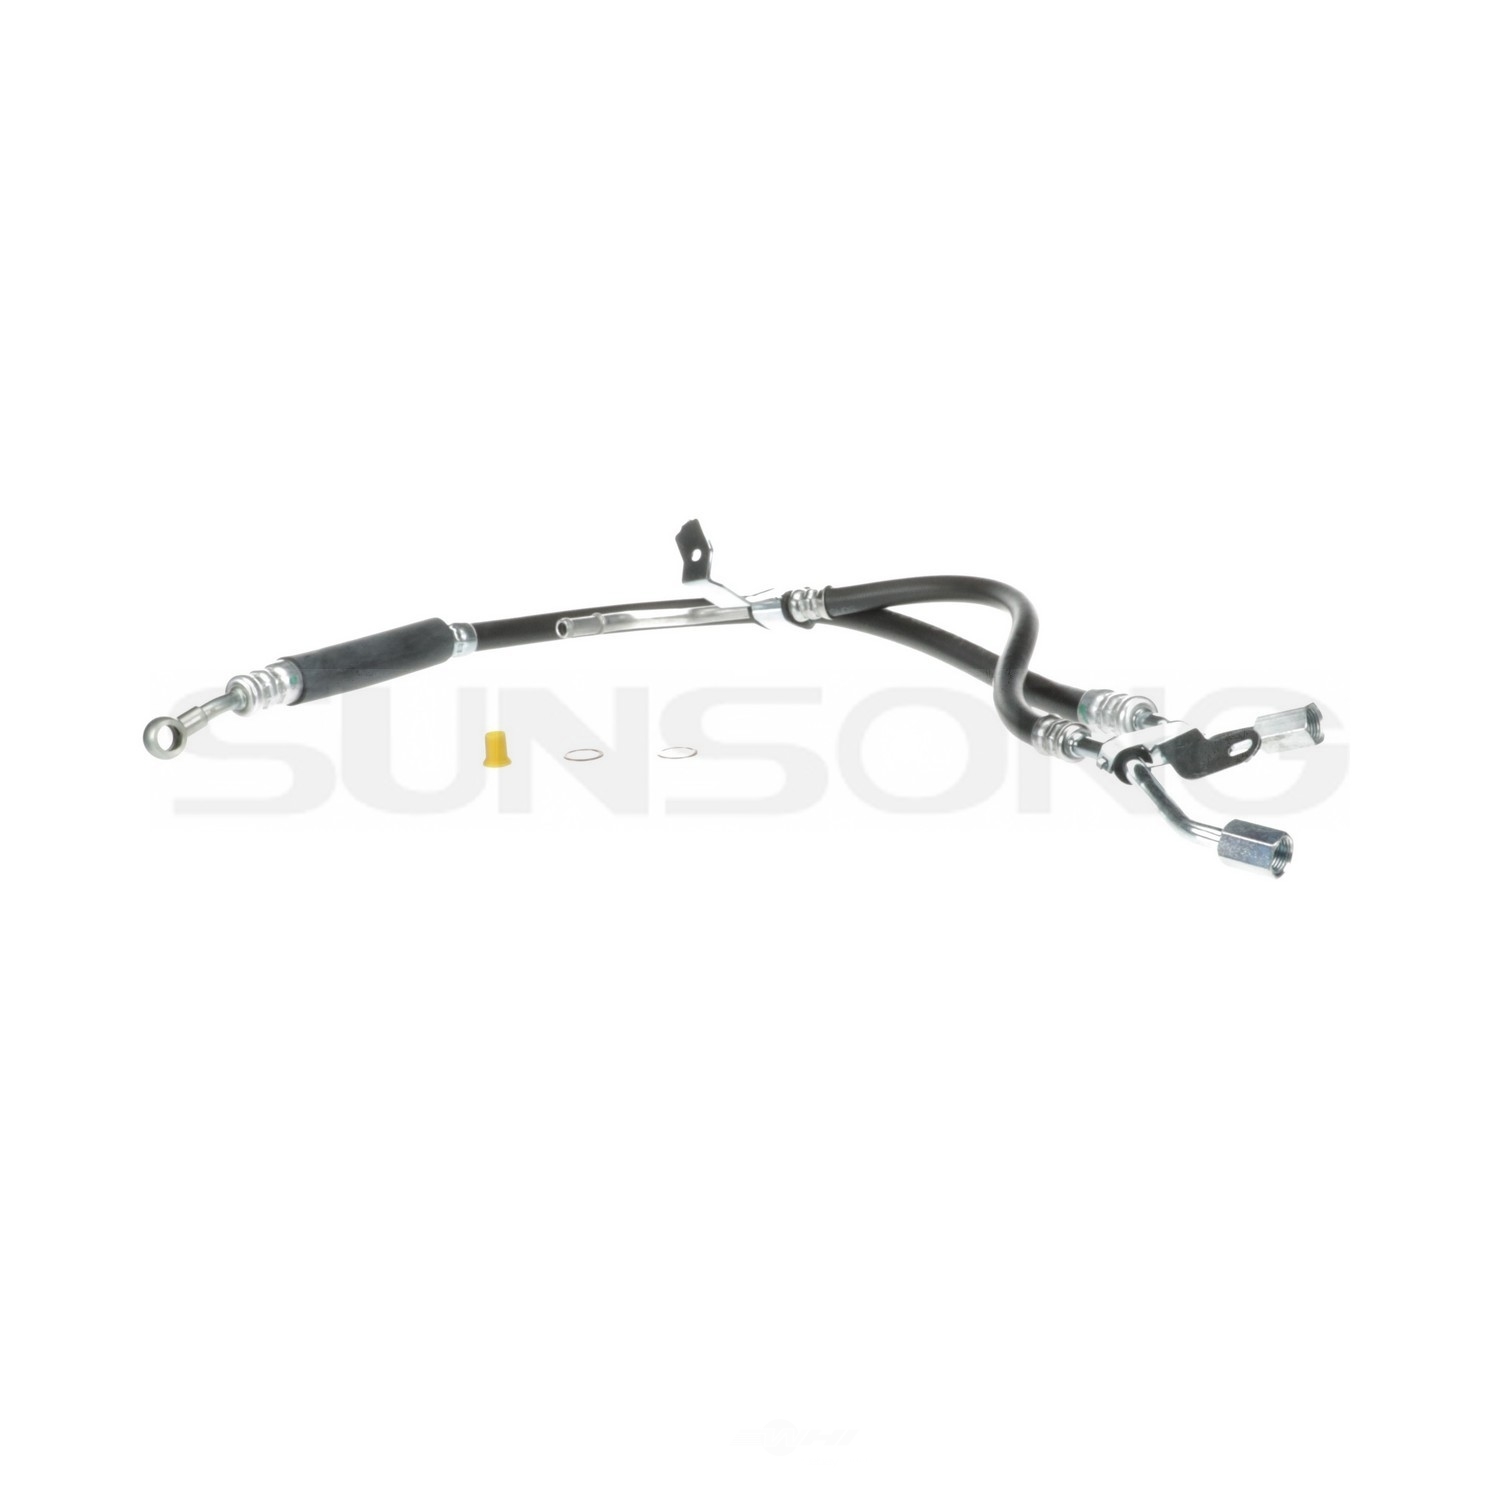 SUNSONG NORTH AMERICA - Power Steering Hose Assembly - SUG 3403945